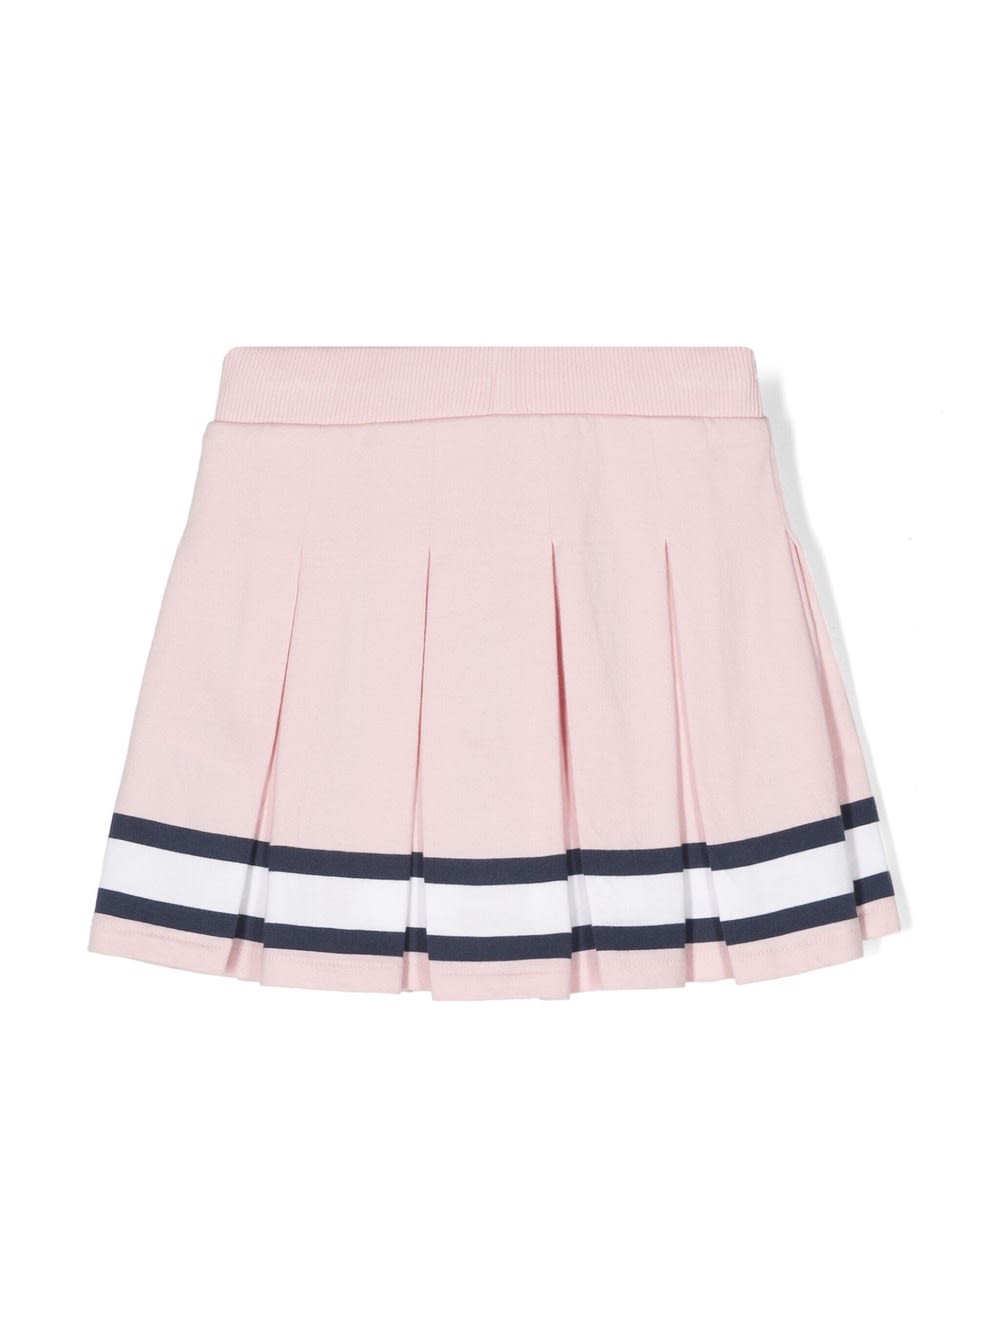 Ralph Lauren Pink Pleated Mini Skirt With Striped Pattern